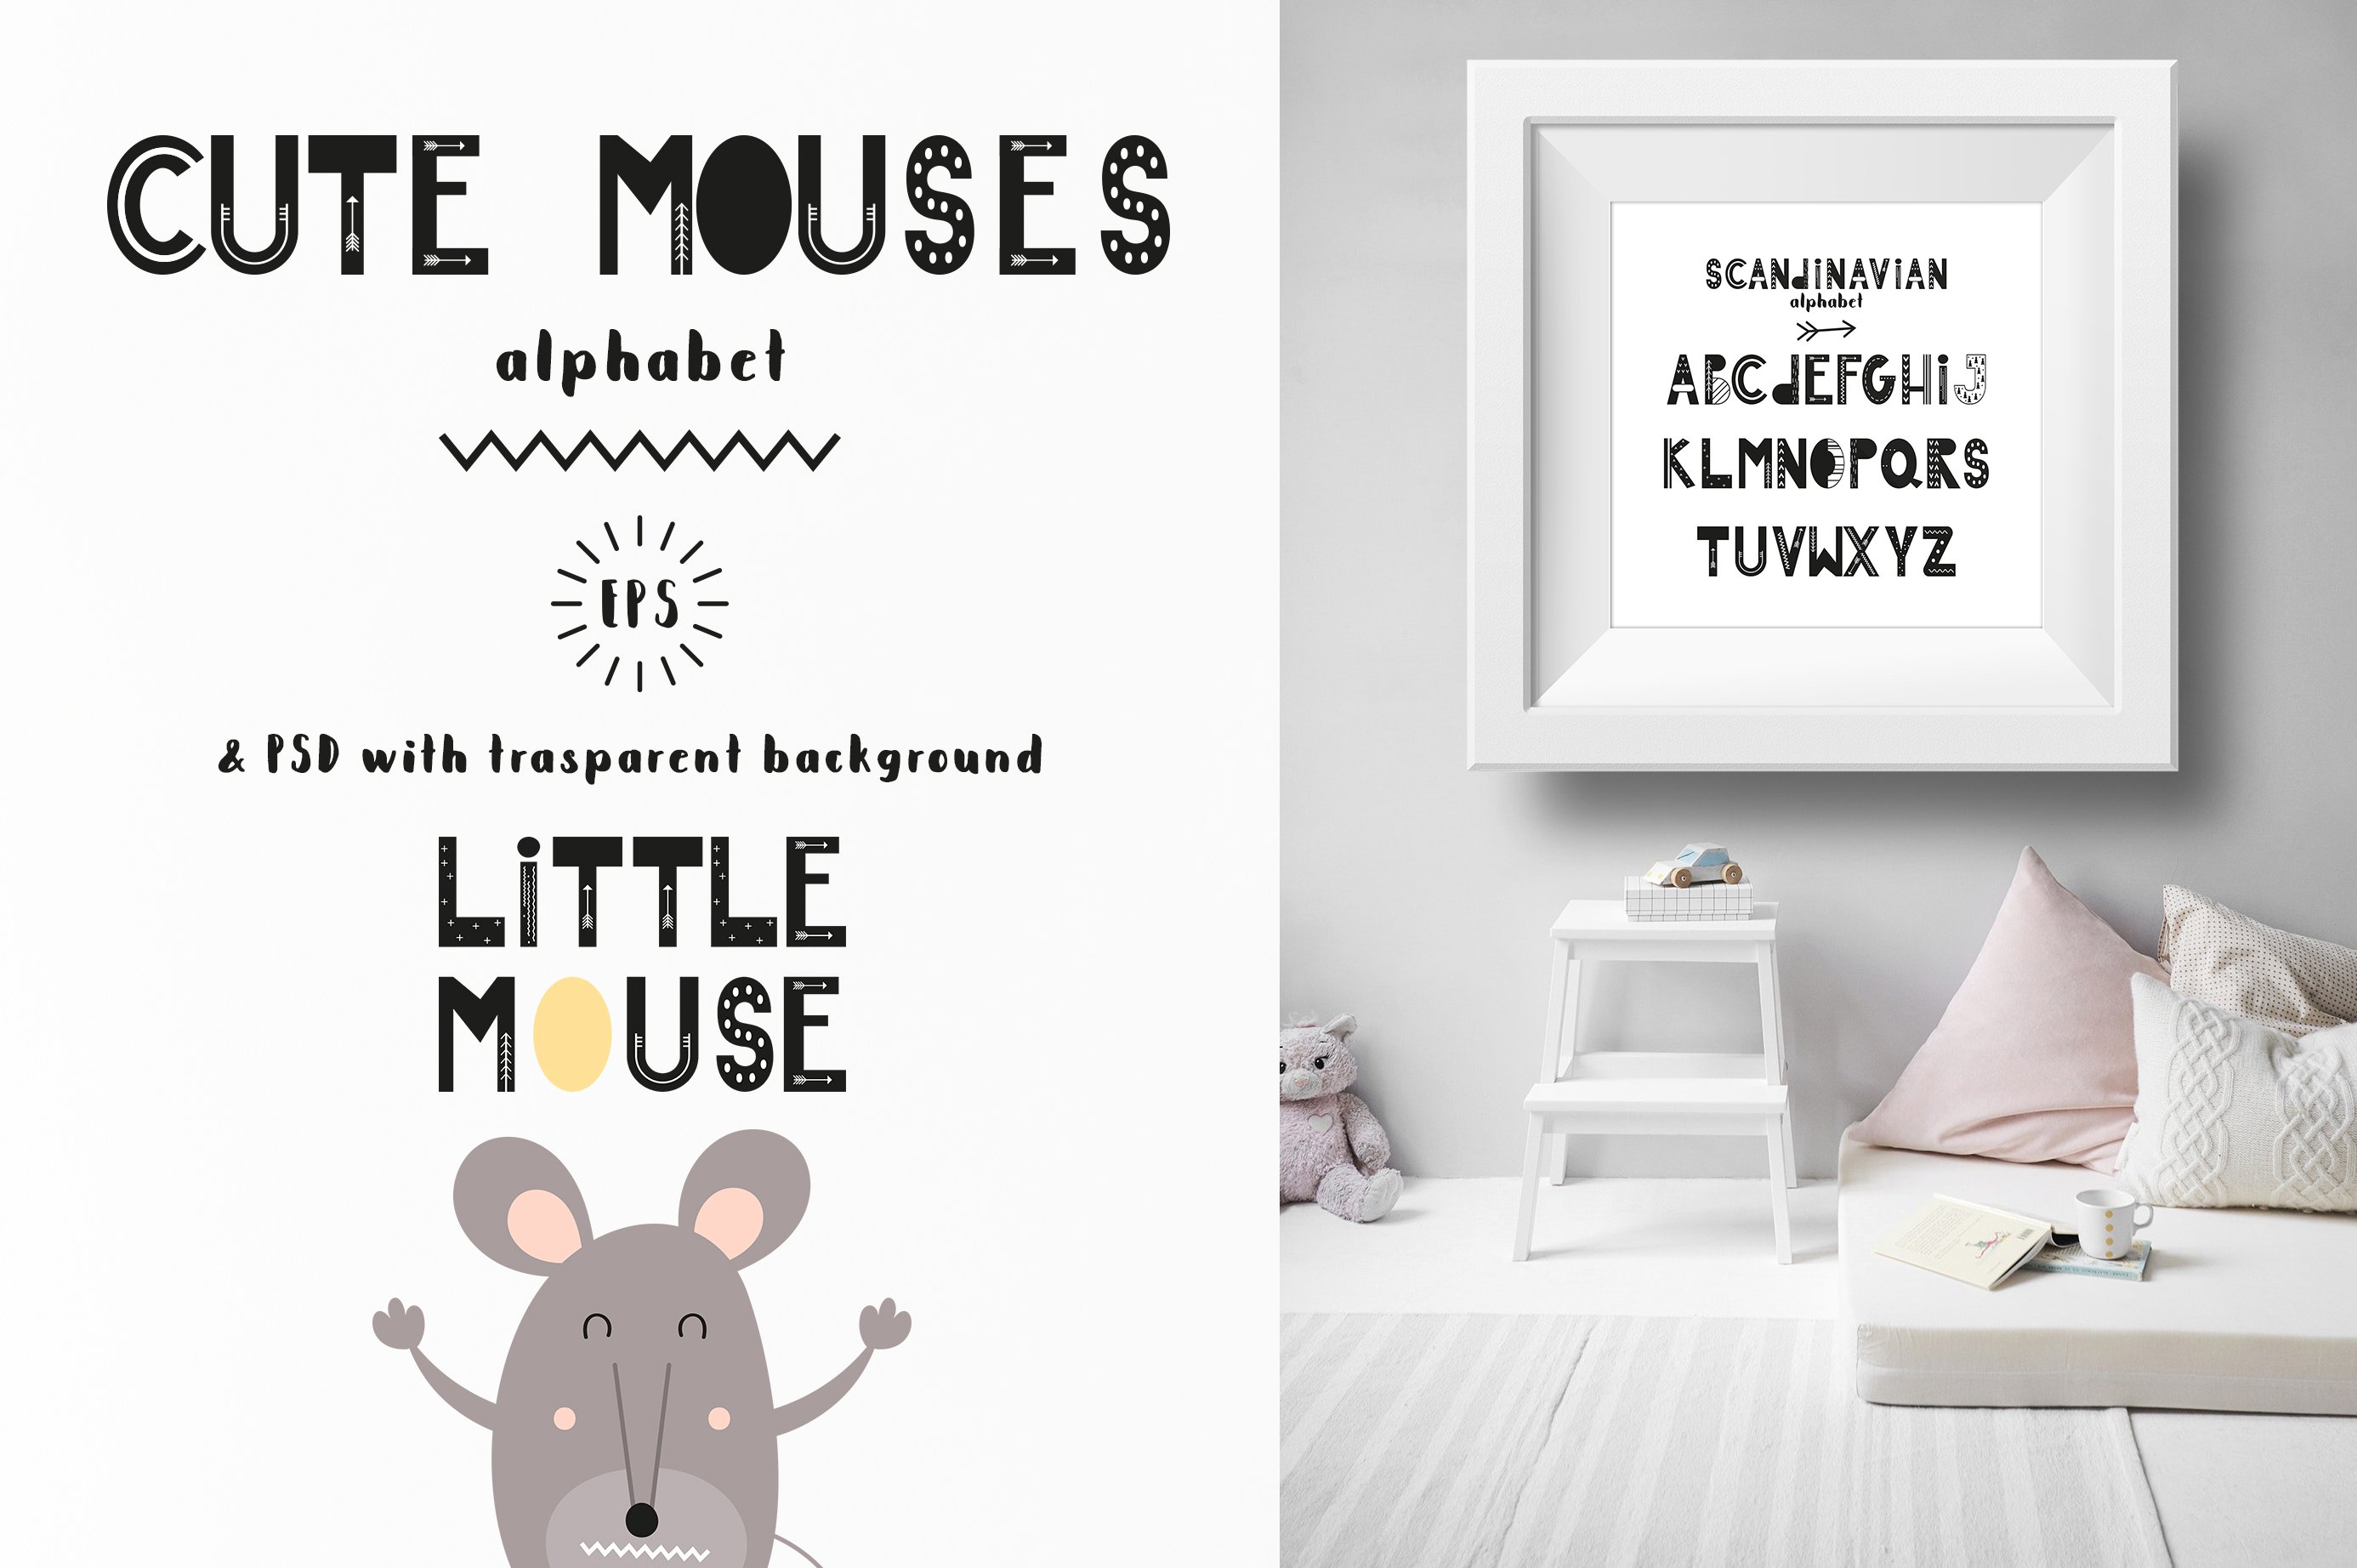 This is a perfect mouses collection for child room.